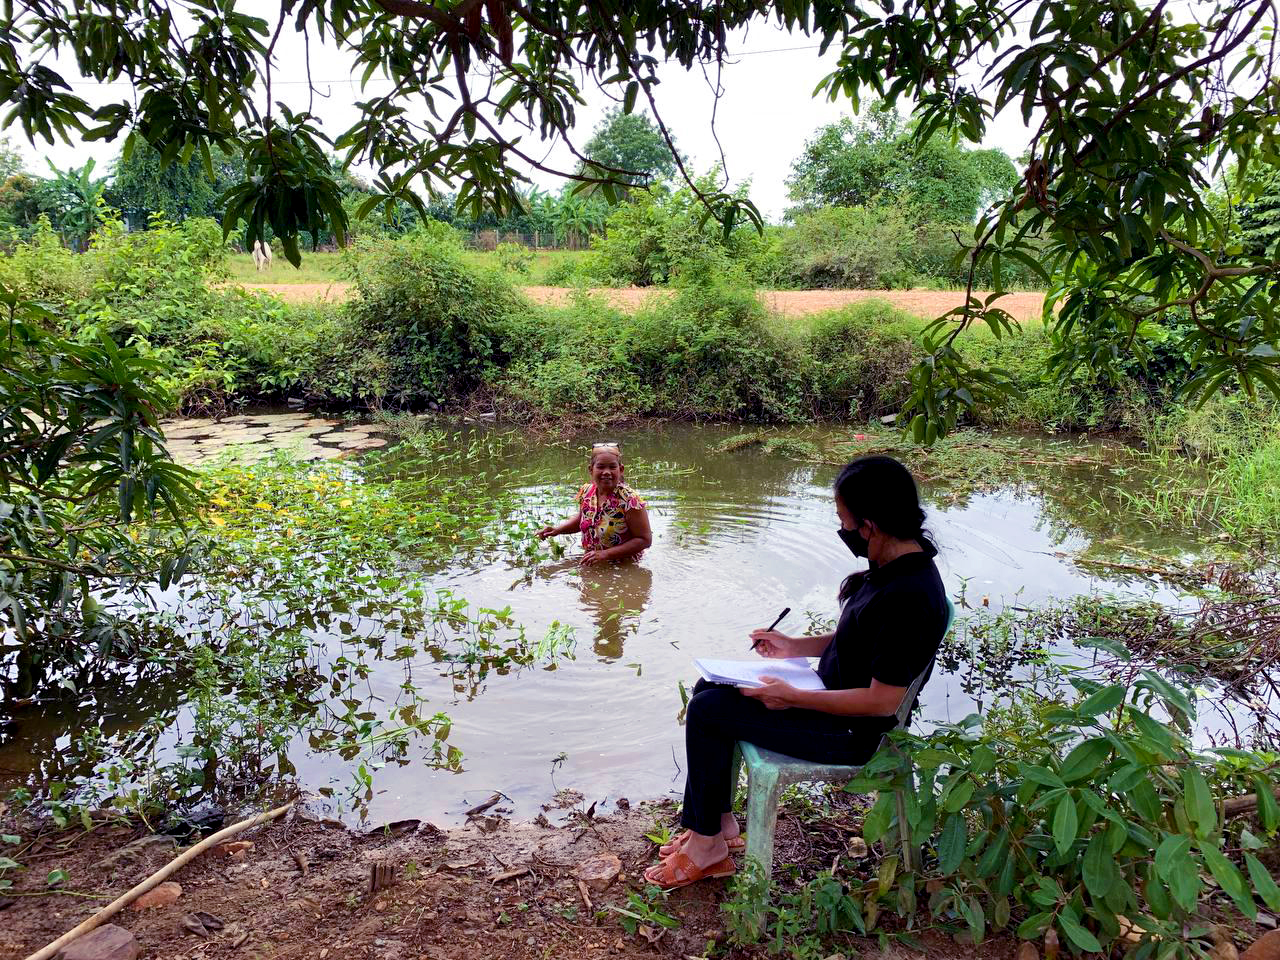 a person in waist-deep water in jungle with another person looking on, courtesy